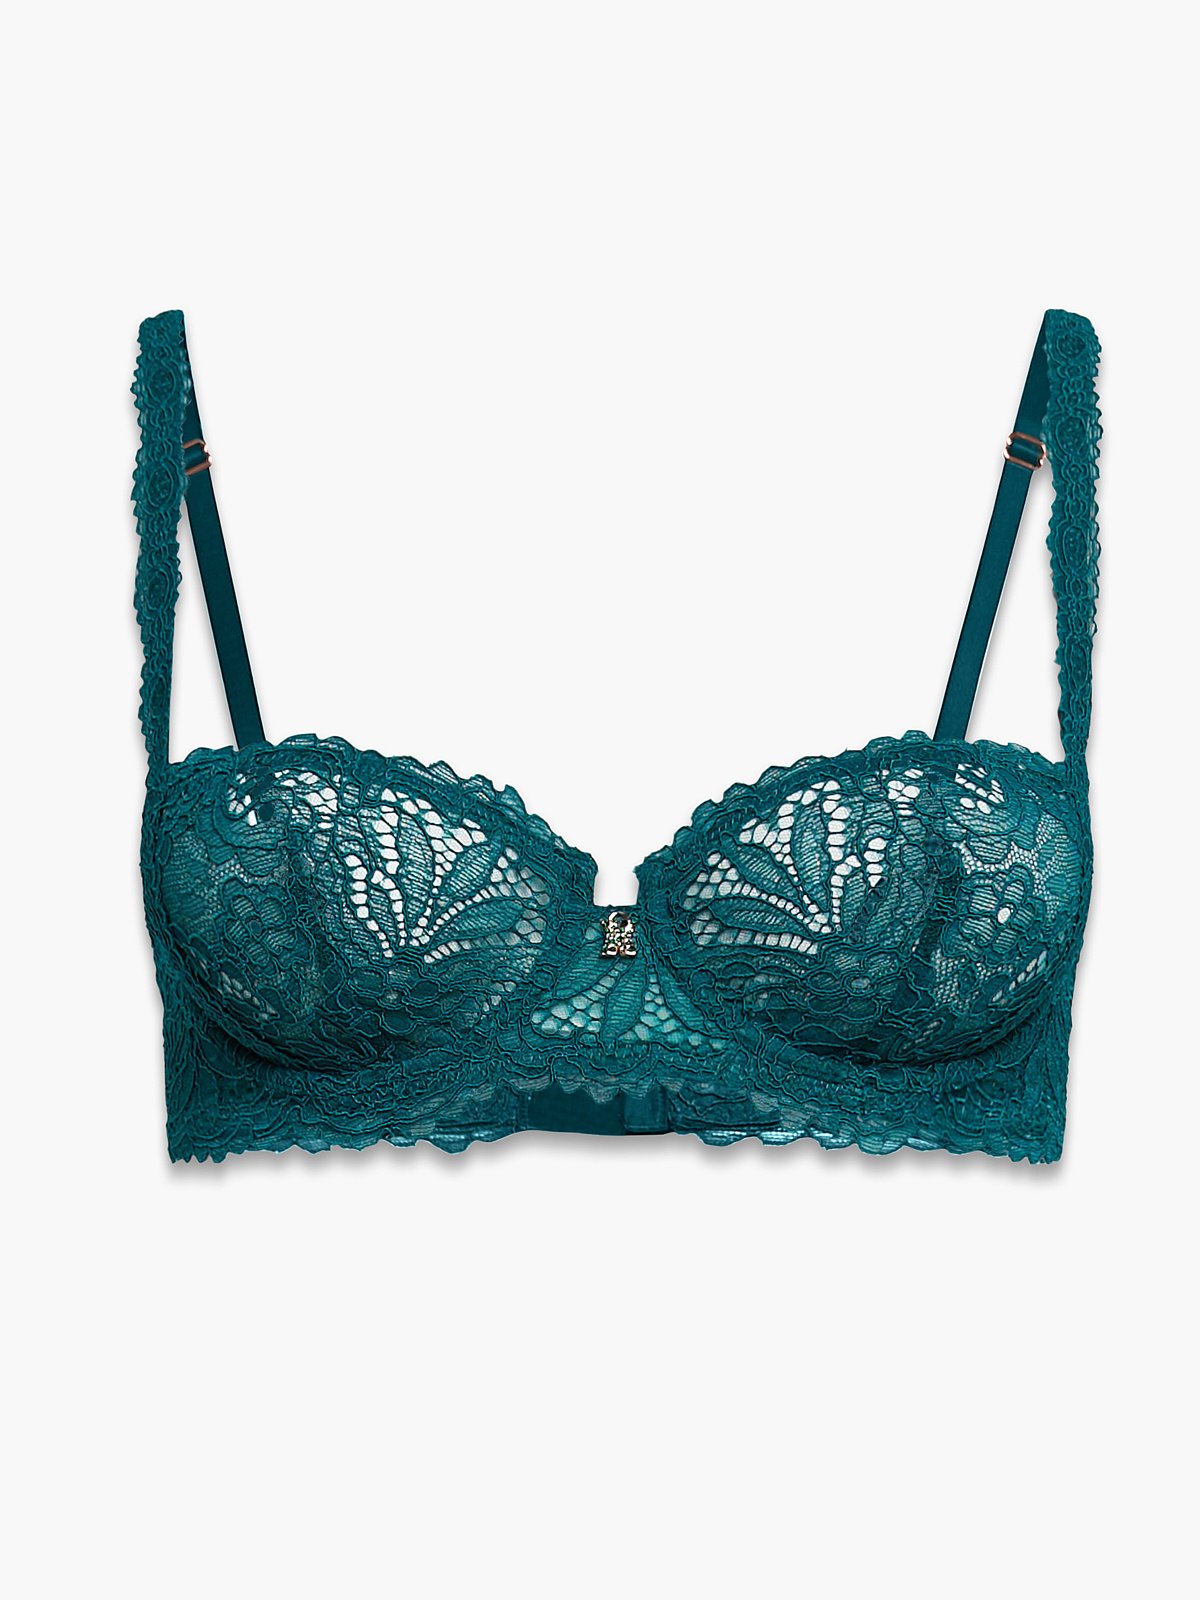 Turquoise Lace Bra